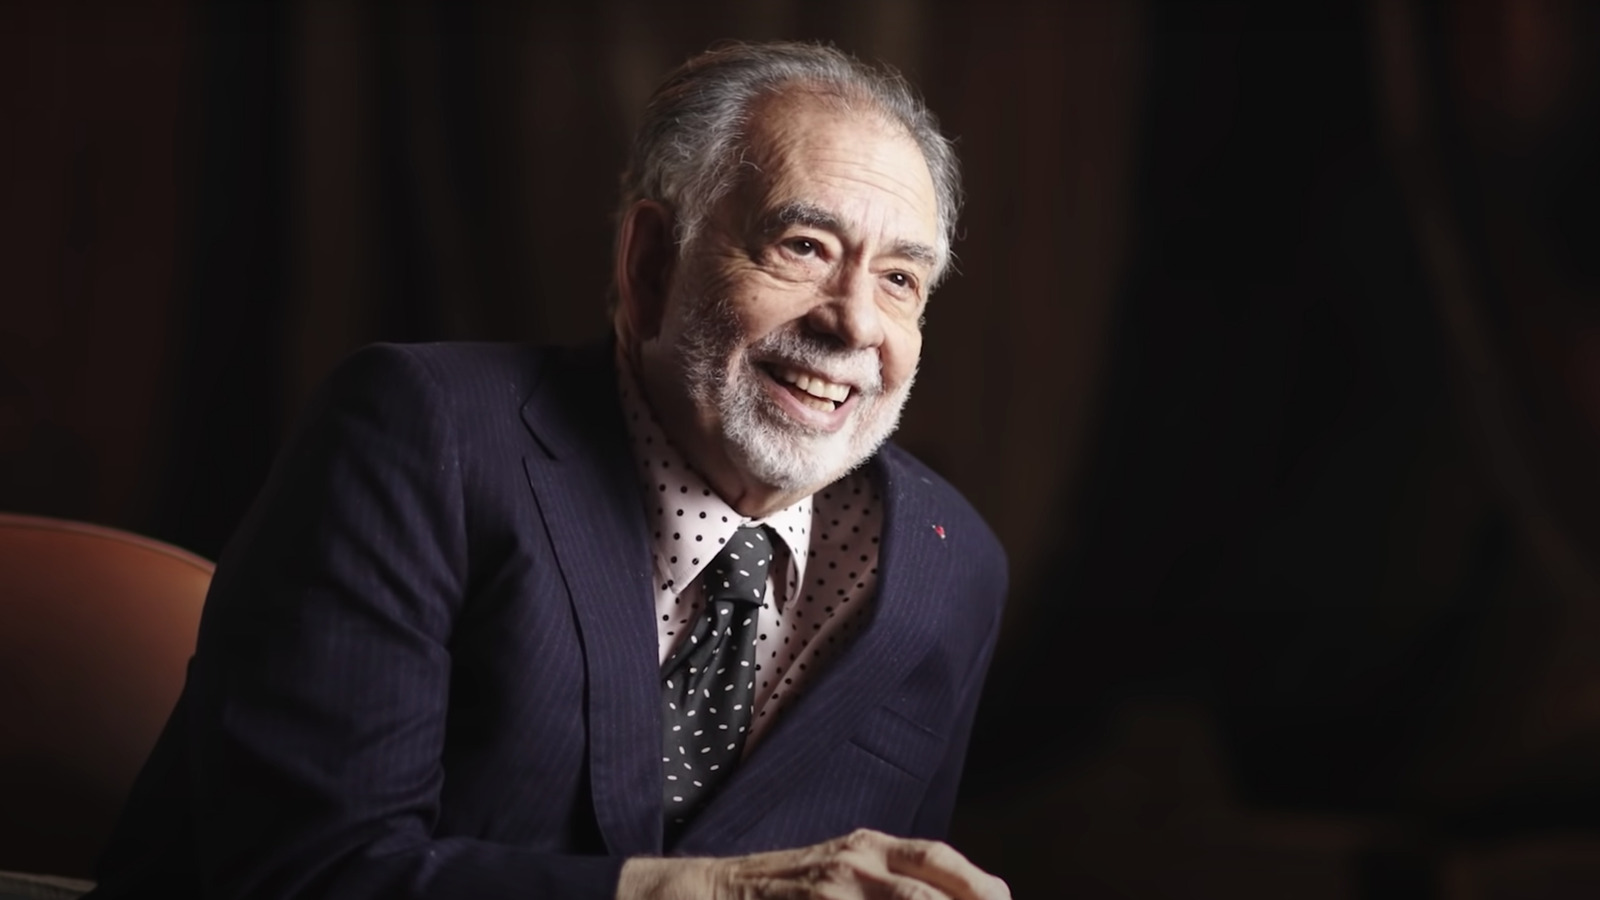 Francis Ford Coppola's Passion Project Megalopolis Is In Trouble. Again.